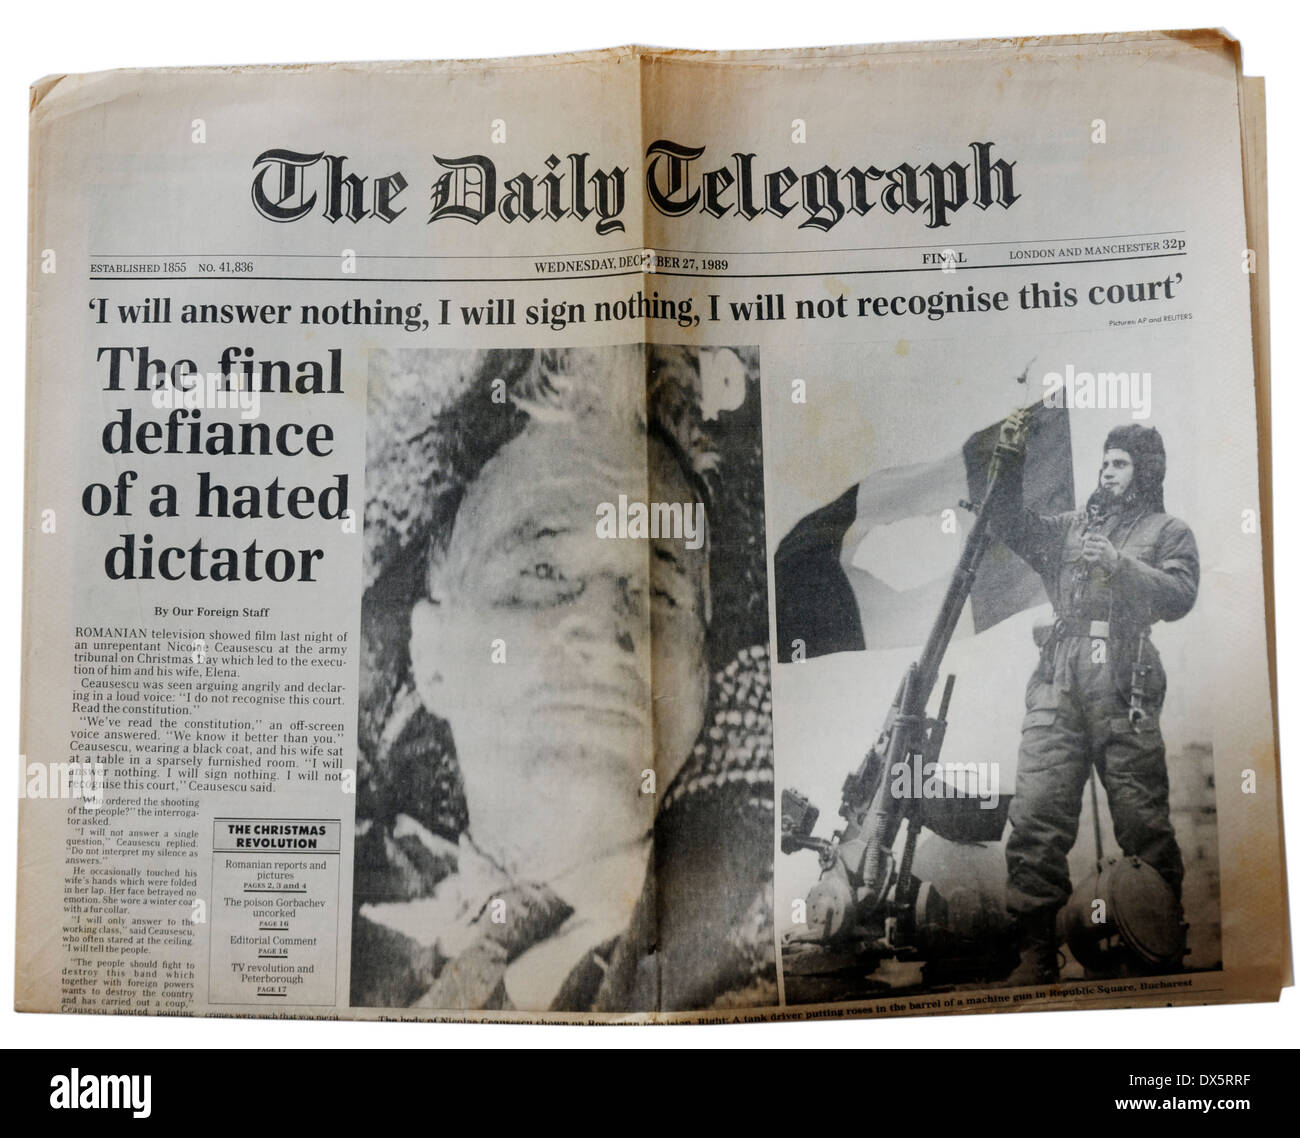 the-daily-telegraph-from-december-27th-1989-announcing-the-execution-DX5RRF.jpg